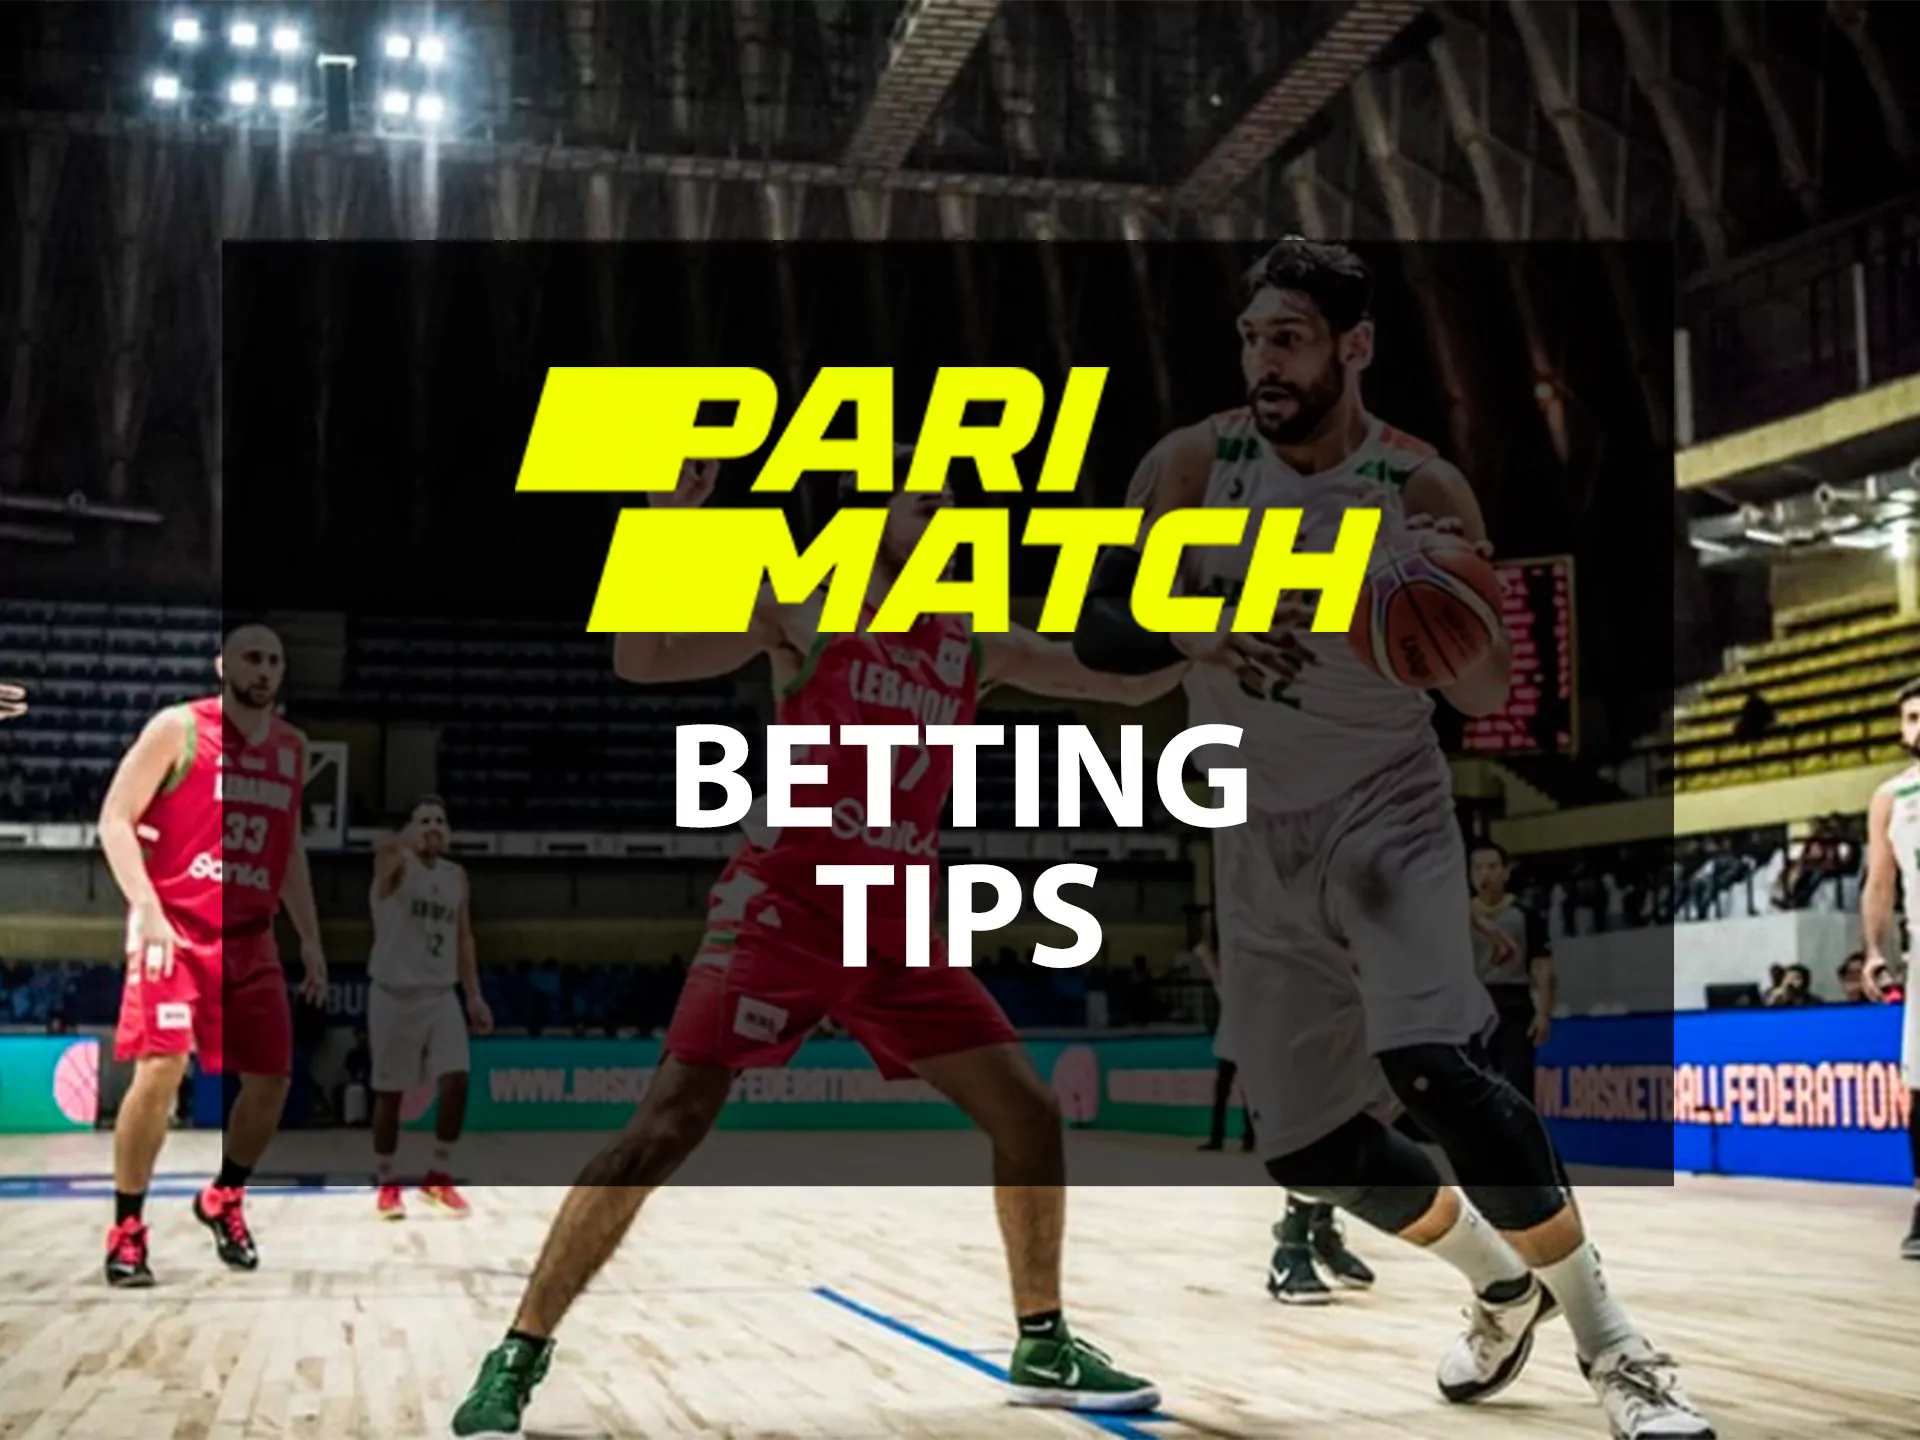 Learn more about your team before betting on it,